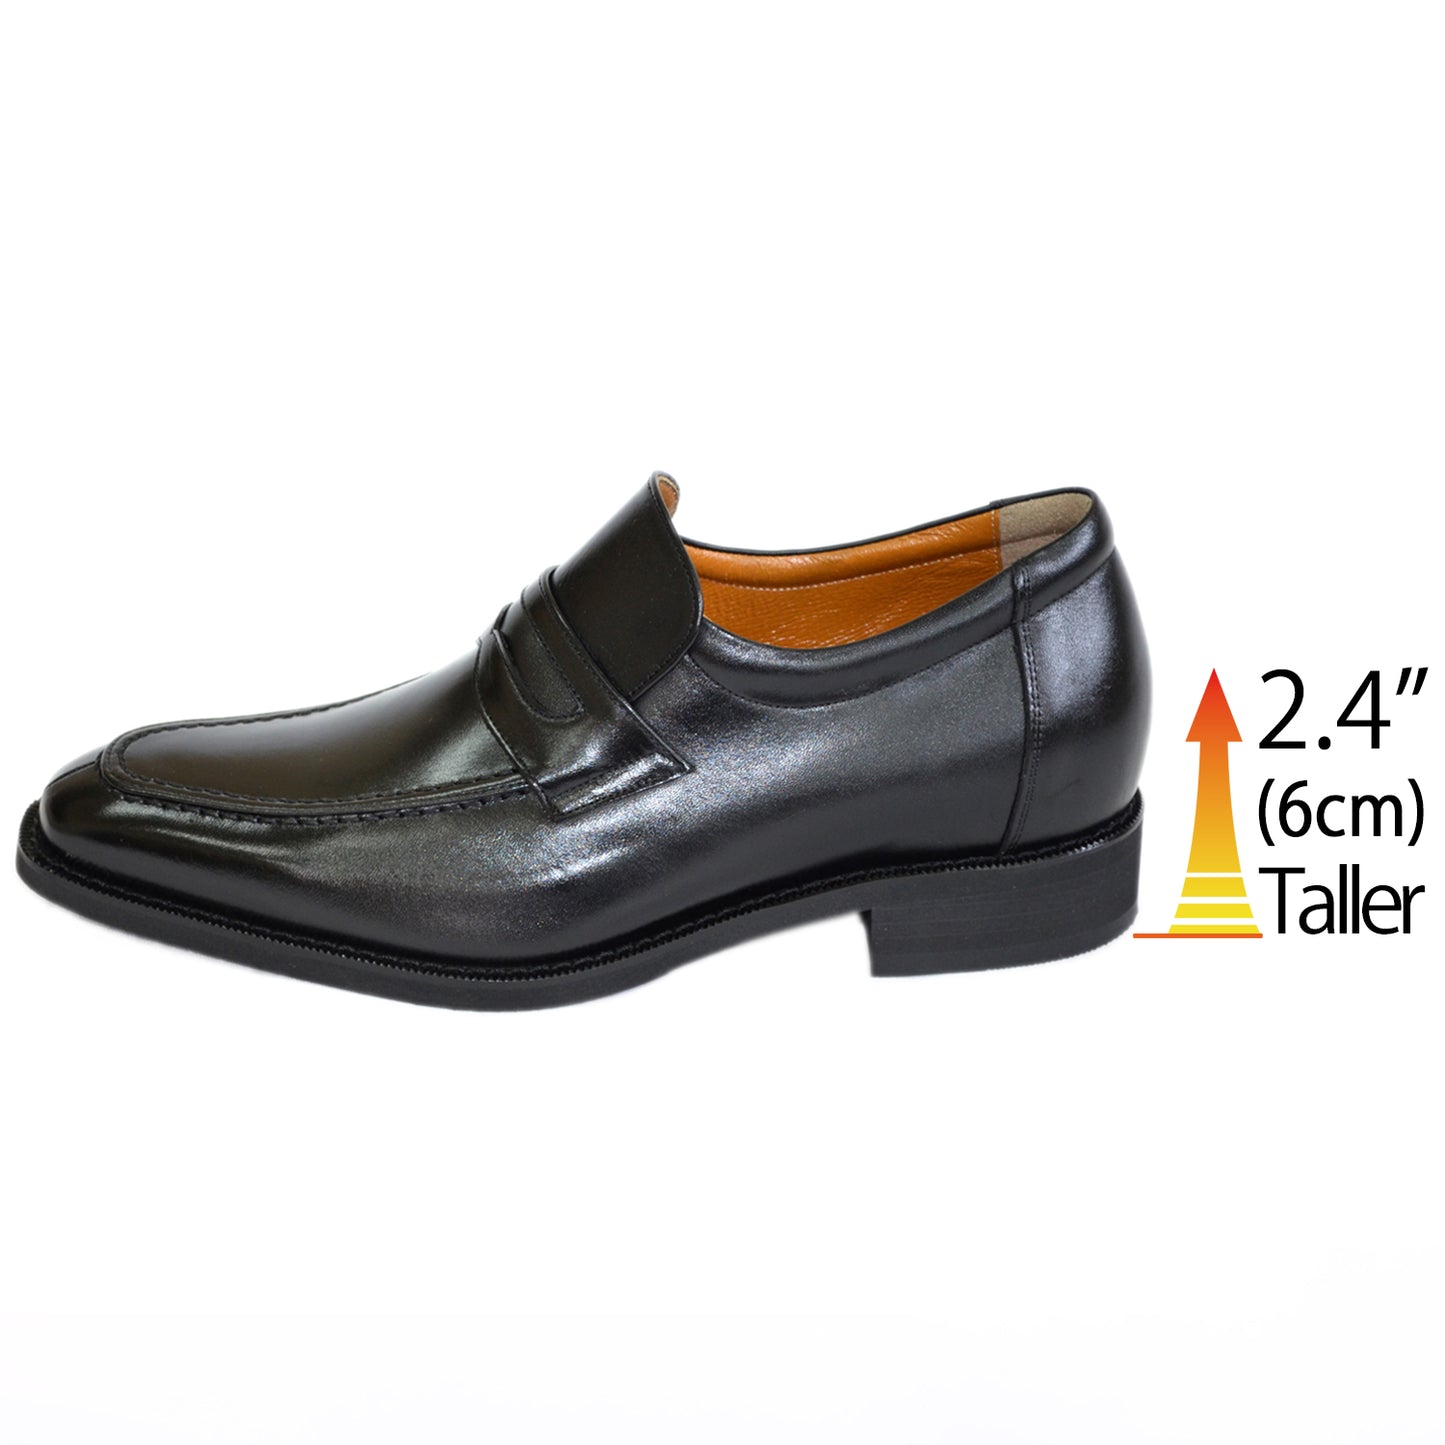 Men's Elevator Shoes Height Increasing 2.36" Taller Loafer Slip-on Dress Shoes Genuine Leather No. 1305